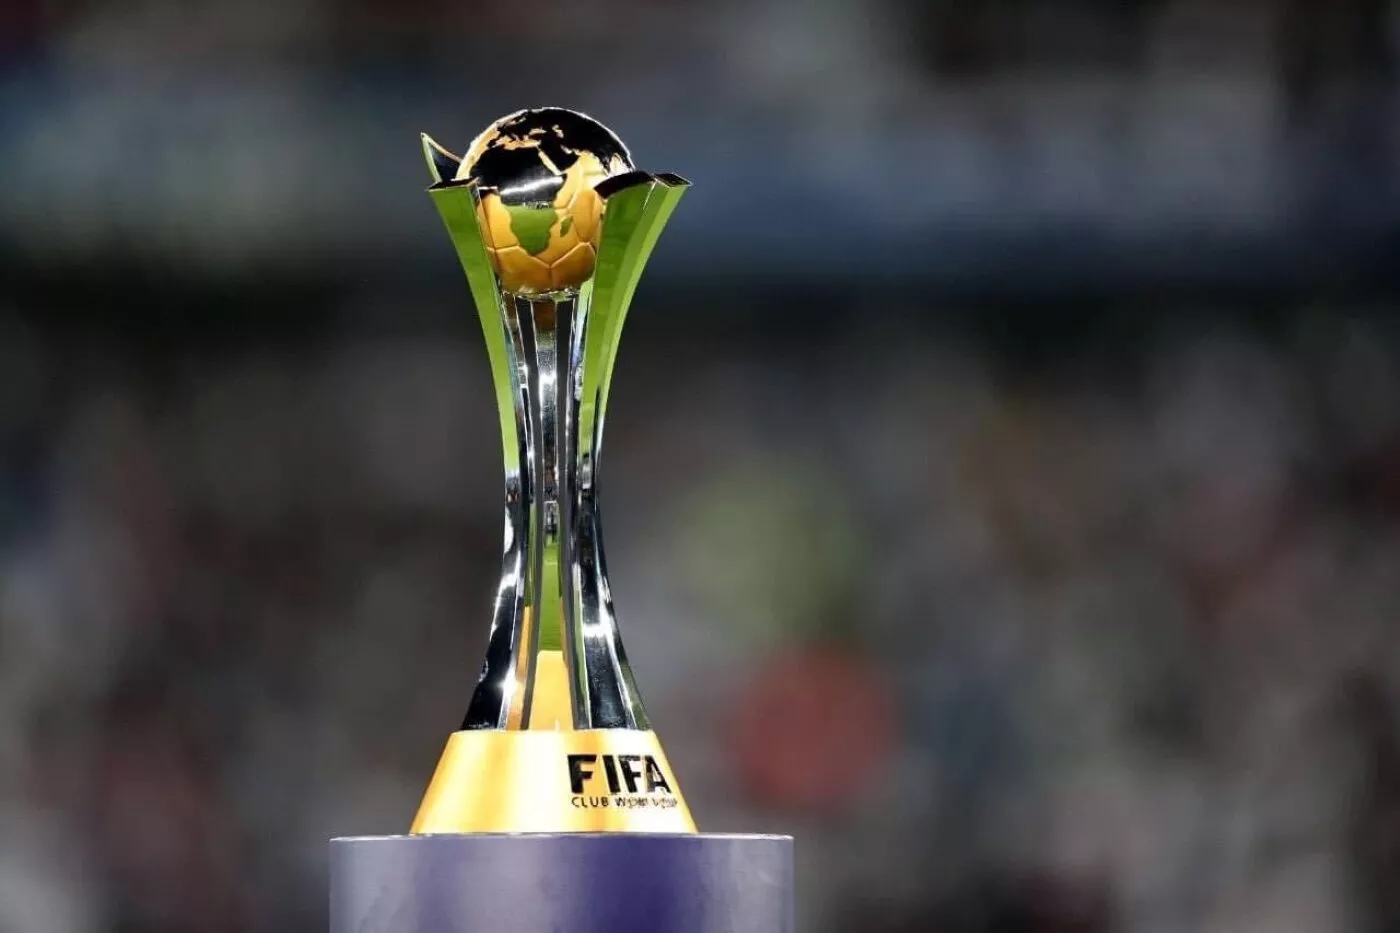 FIFA Club World Cup 2025 tournament dates confirmed